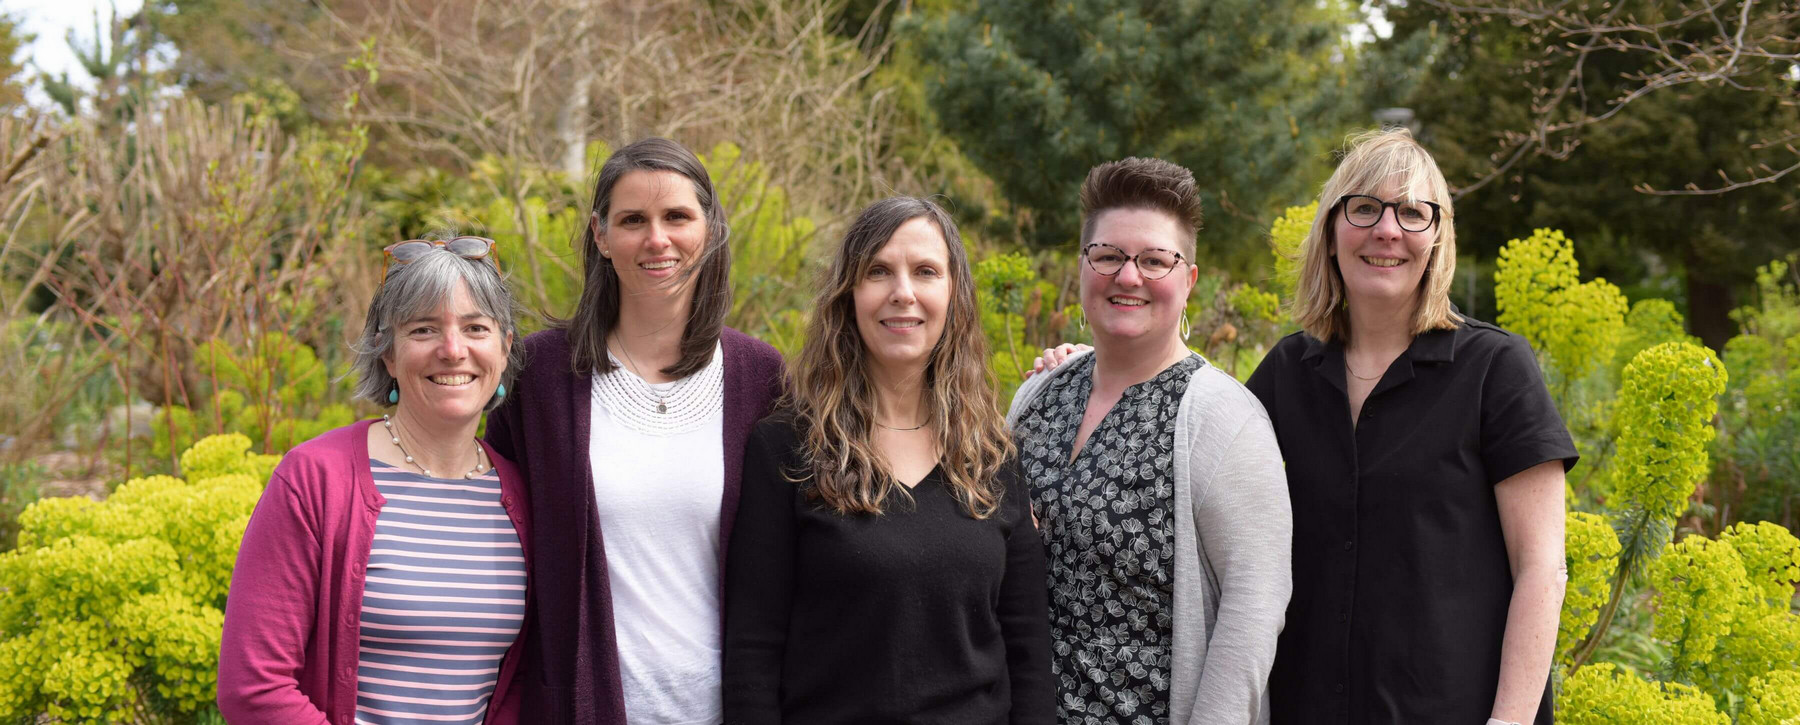 The Teacher Education team is pictured together outside the MacLaurin Building during spring.